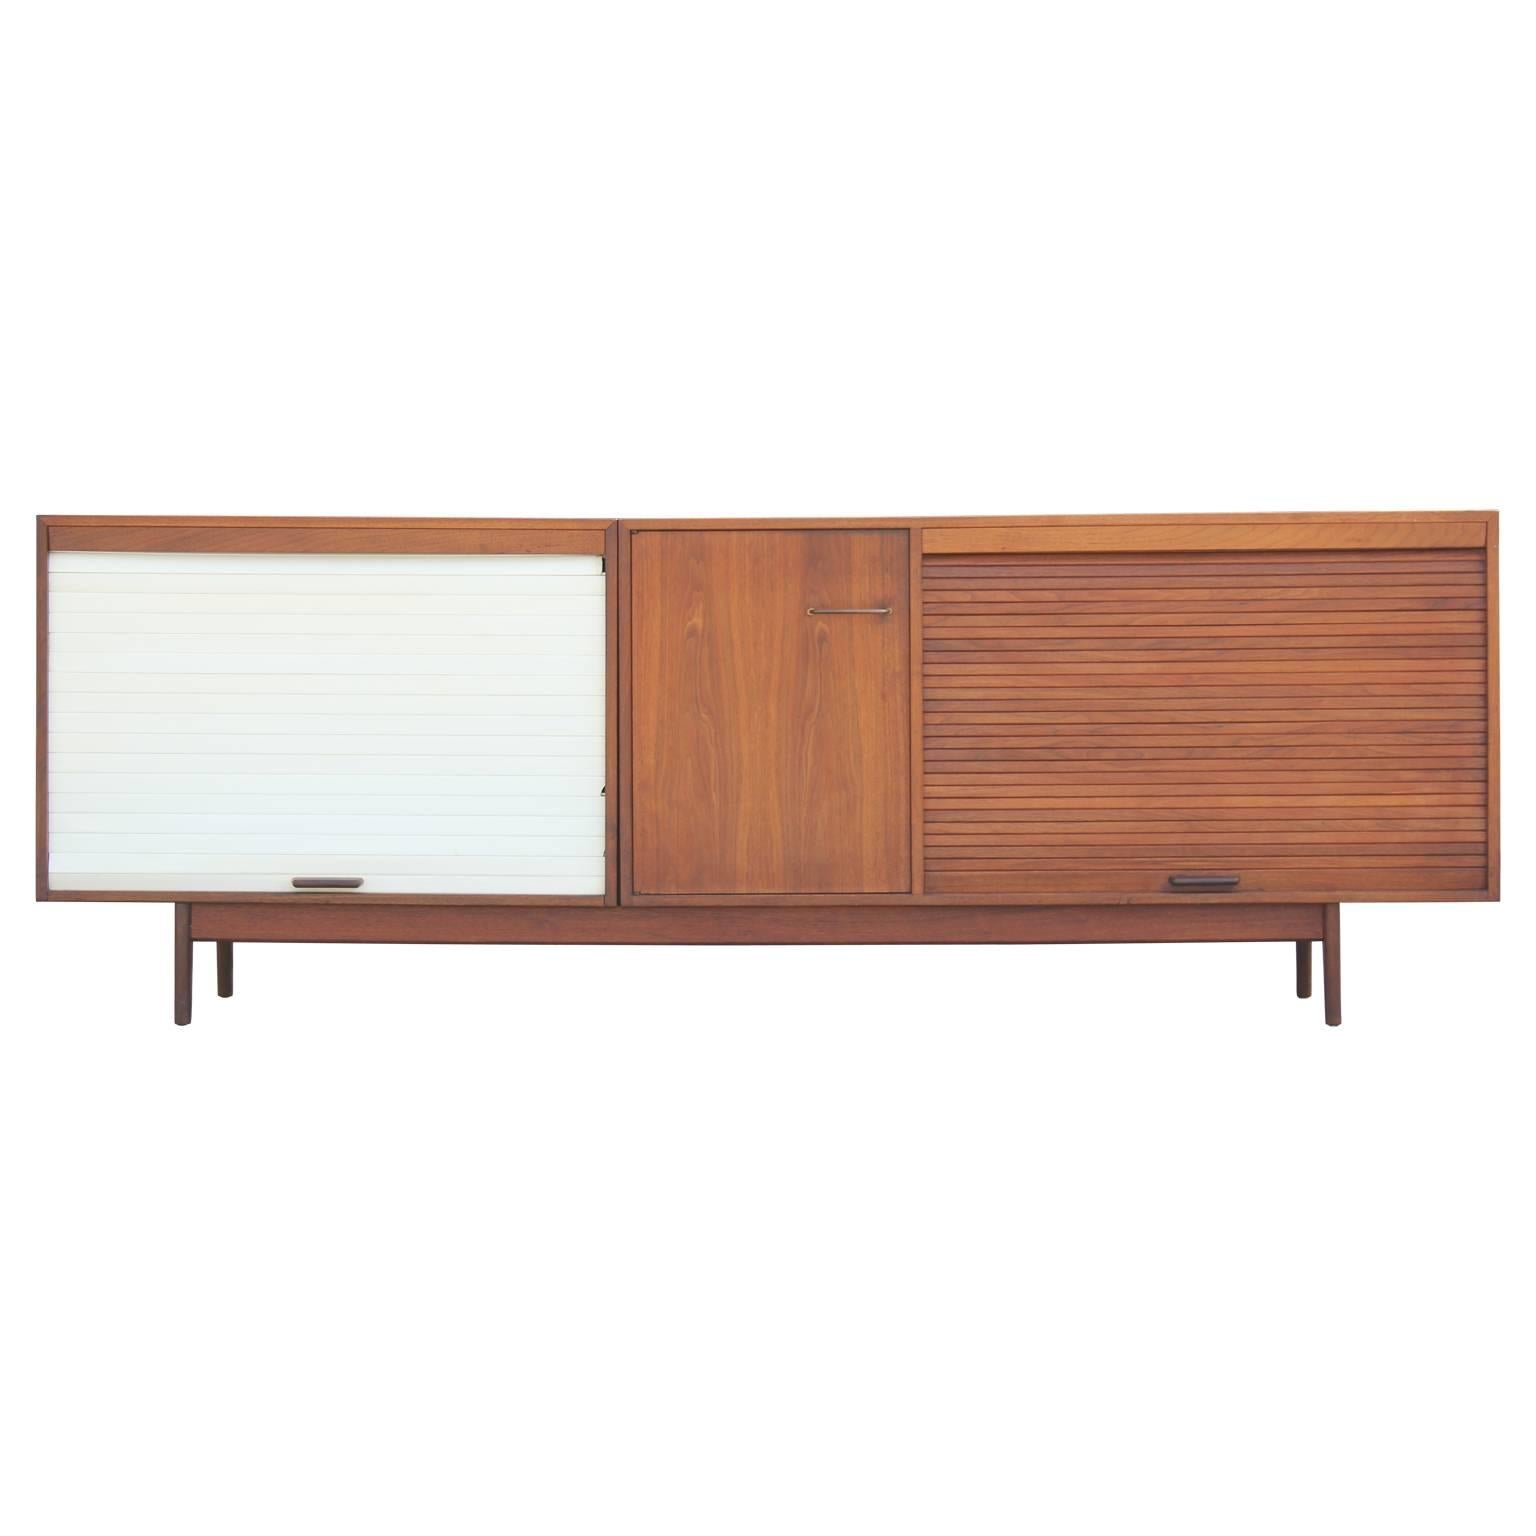 Gorgeous modern walnut sideboard or credenza with one white plastic tambour door and one made from walnut. There are a few chips in the plastic and the piece would like nice refinished, but an overall great credenza. 